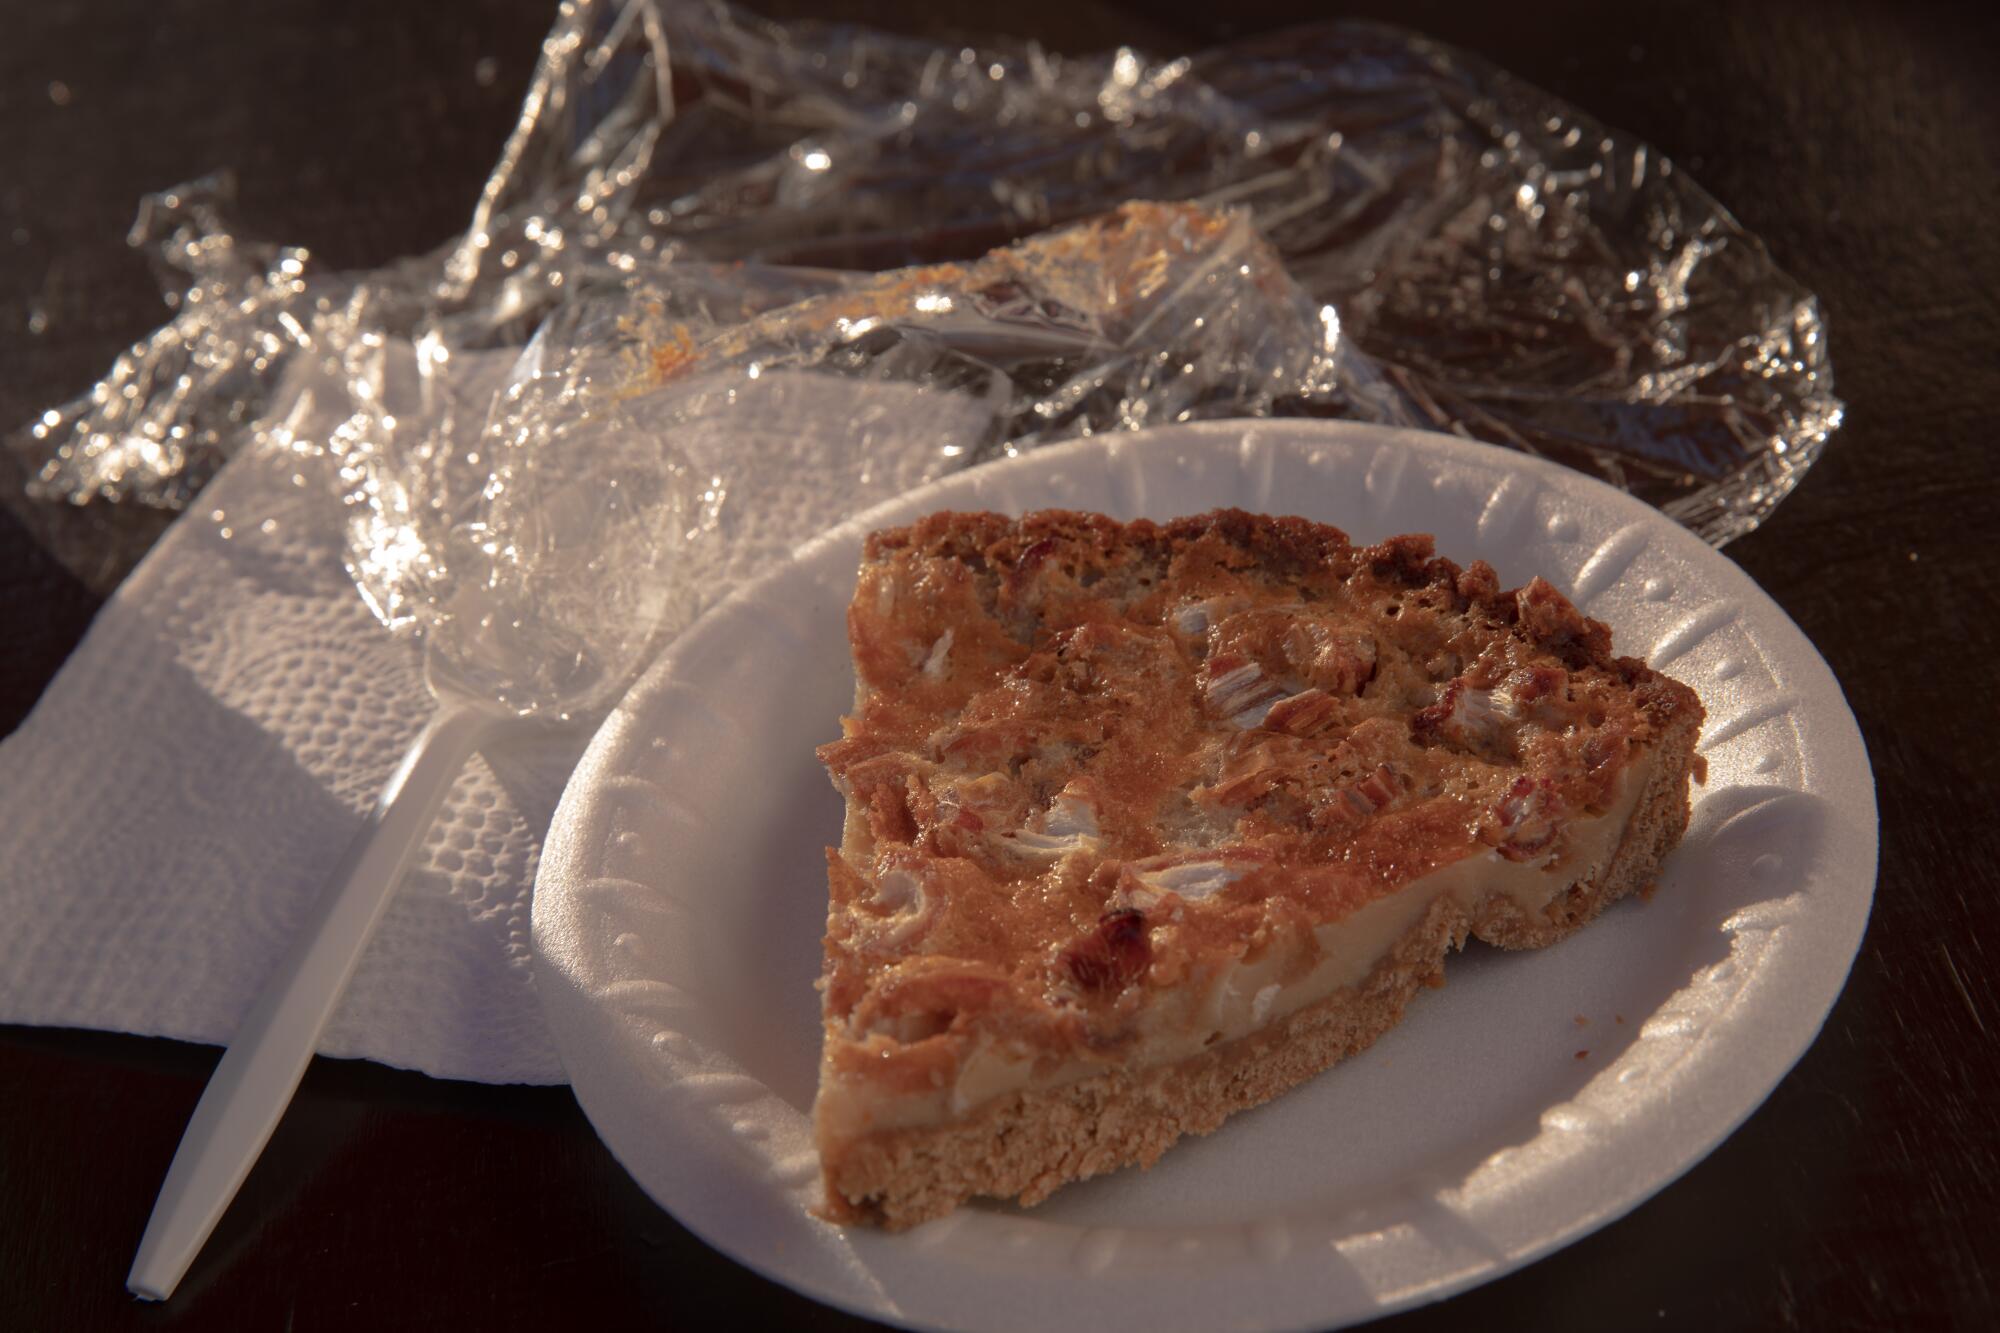 A styrofoam plate holding a slice of fig pie, illuminated by sunlight.